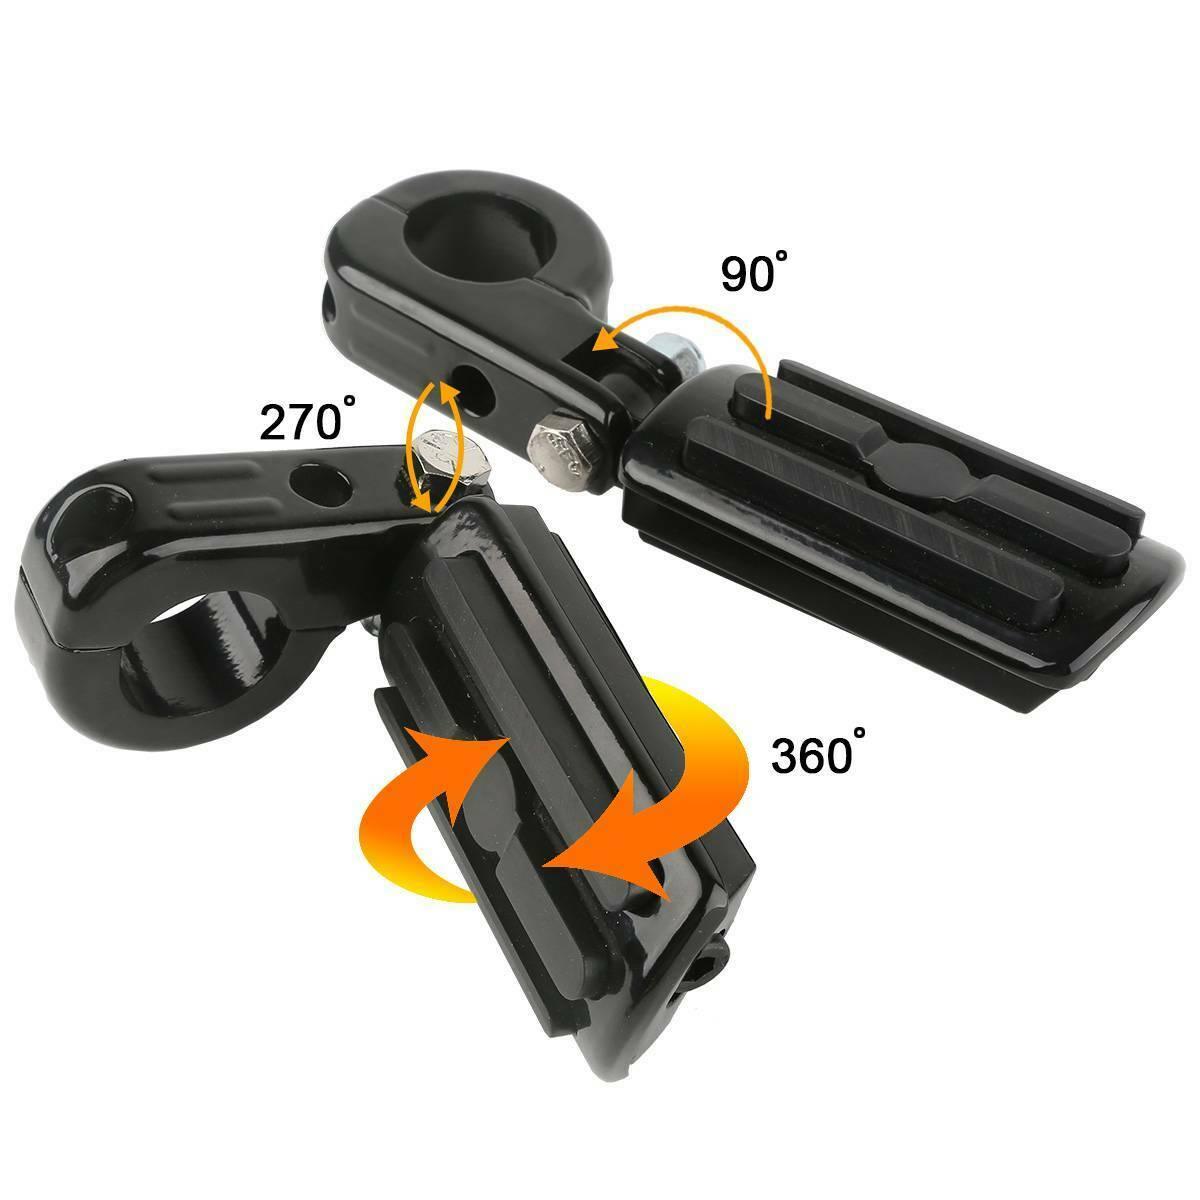 1.25" Engine Guard Crash Bar Highway Foot Pegs Fit For Harley Touring Road King - Moto Life Products